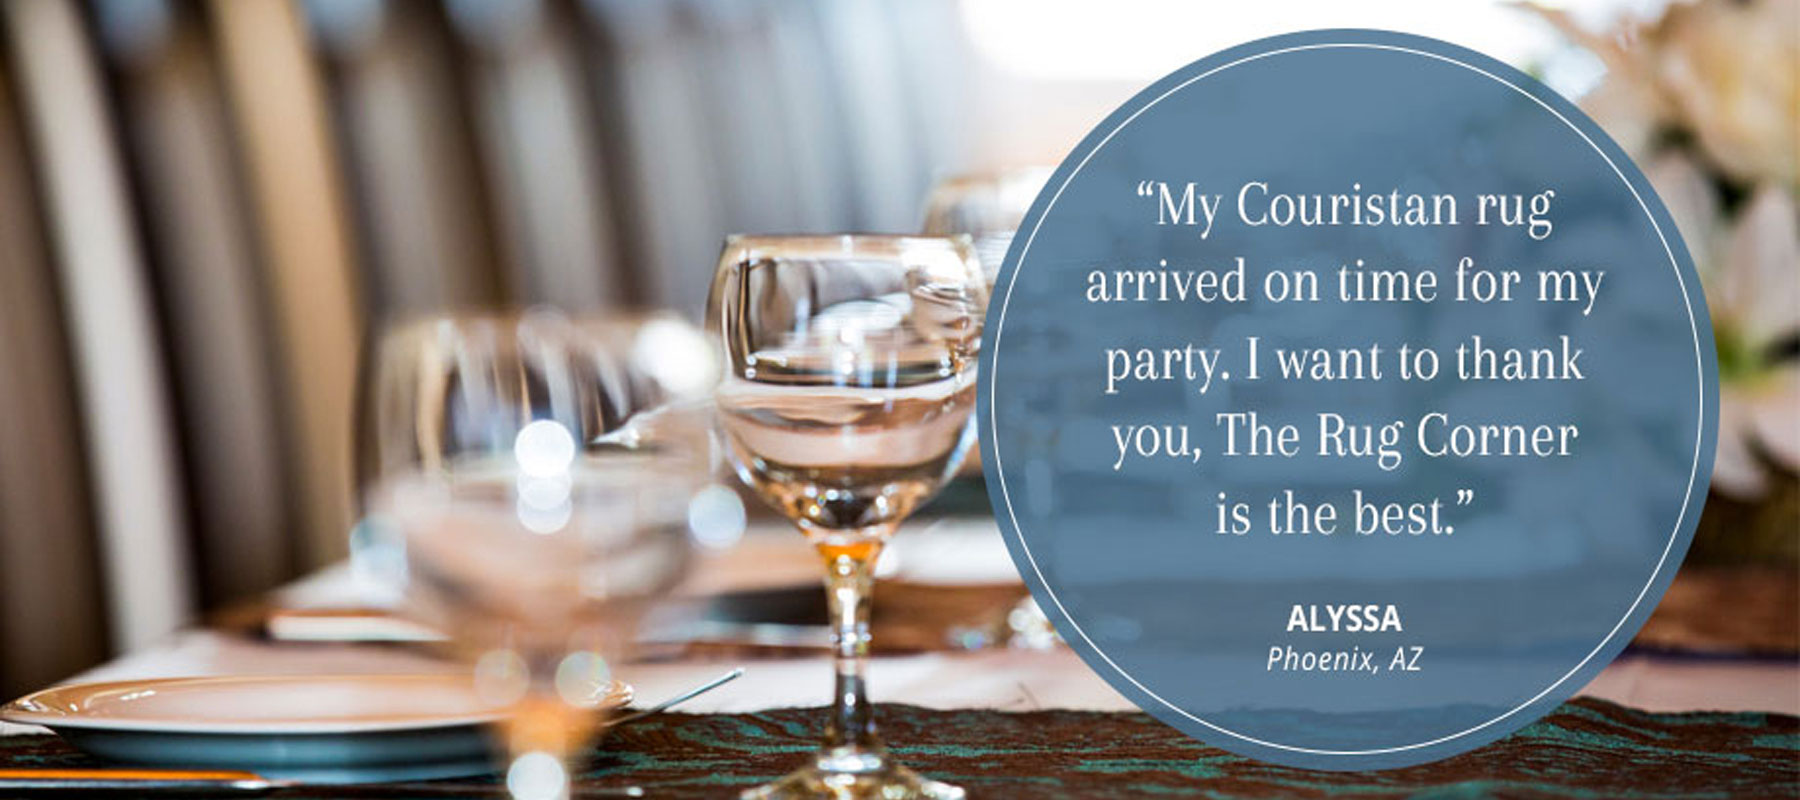 Customer Testimonial - My Couristan rug arrived on time for my party. I want to thank you, The Rug Corner is the best. Alyssa Phoenix, AZ.